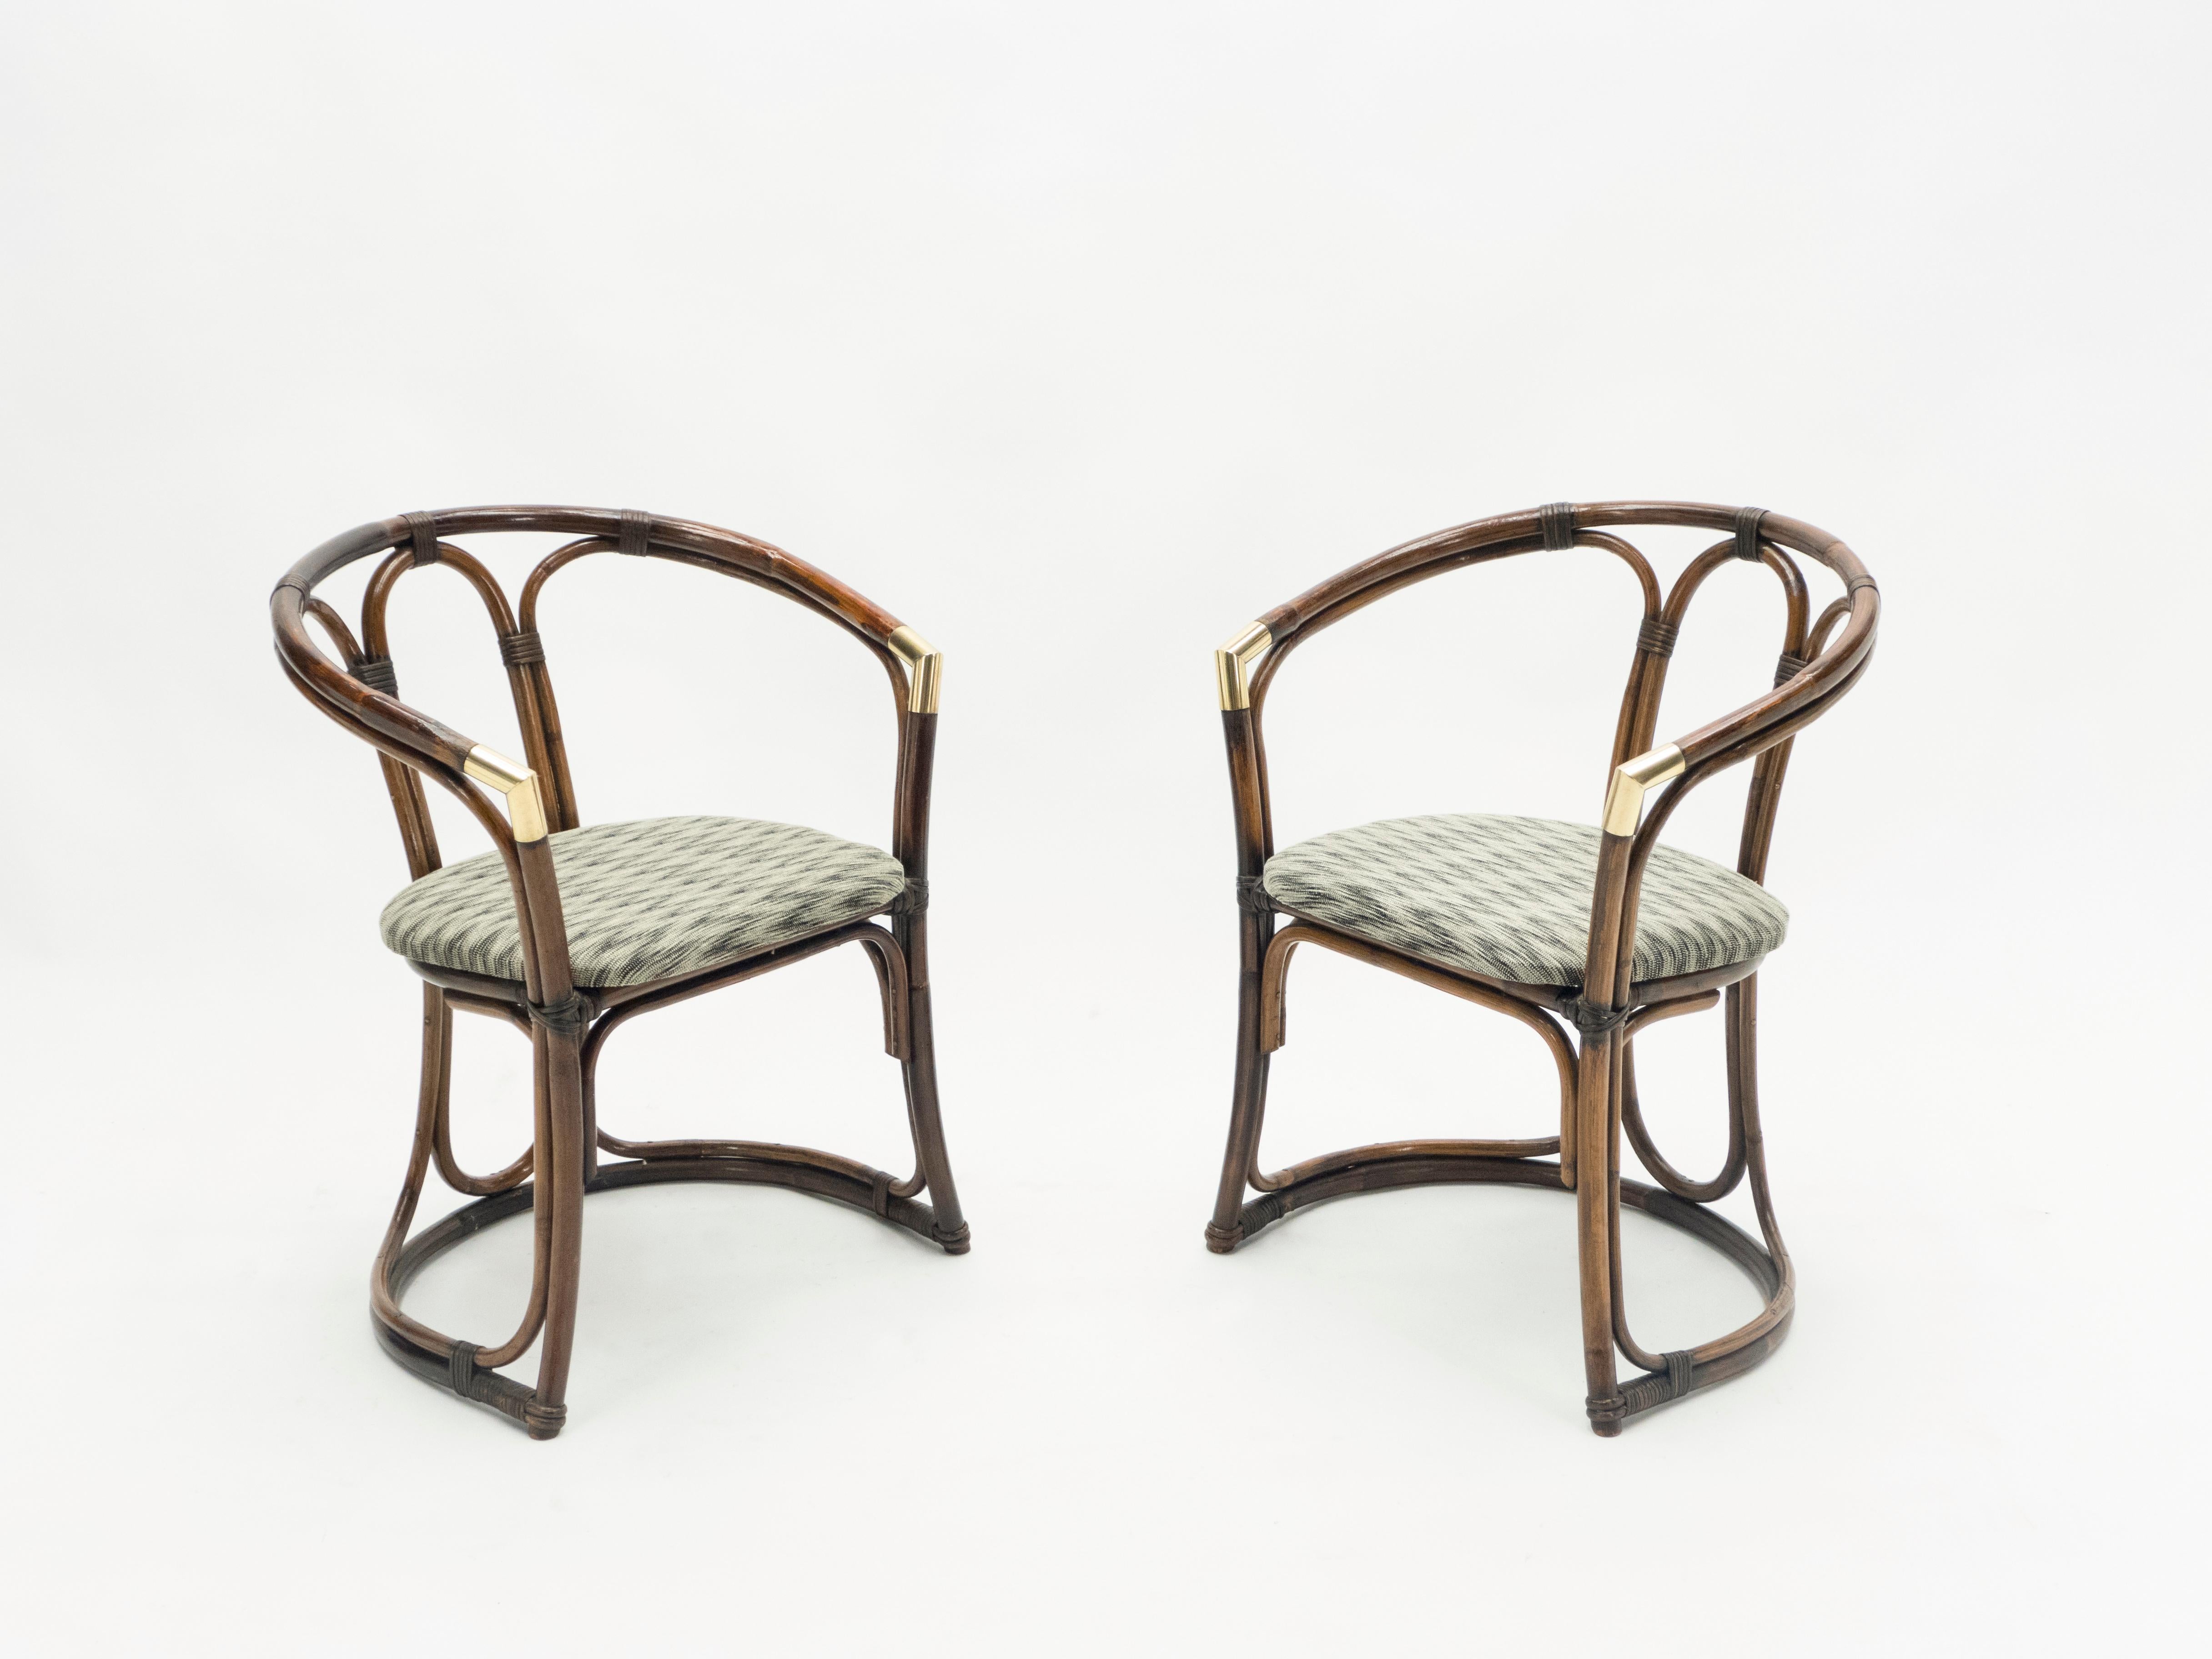 This pair of bamboo armchairs from the Mid-Century Modern French Riviera period is bursting with nostalgia. A beautiful brown bamboo structure with brass accents and graphic chevron pattern seating would feel right at home in a stylish vacation